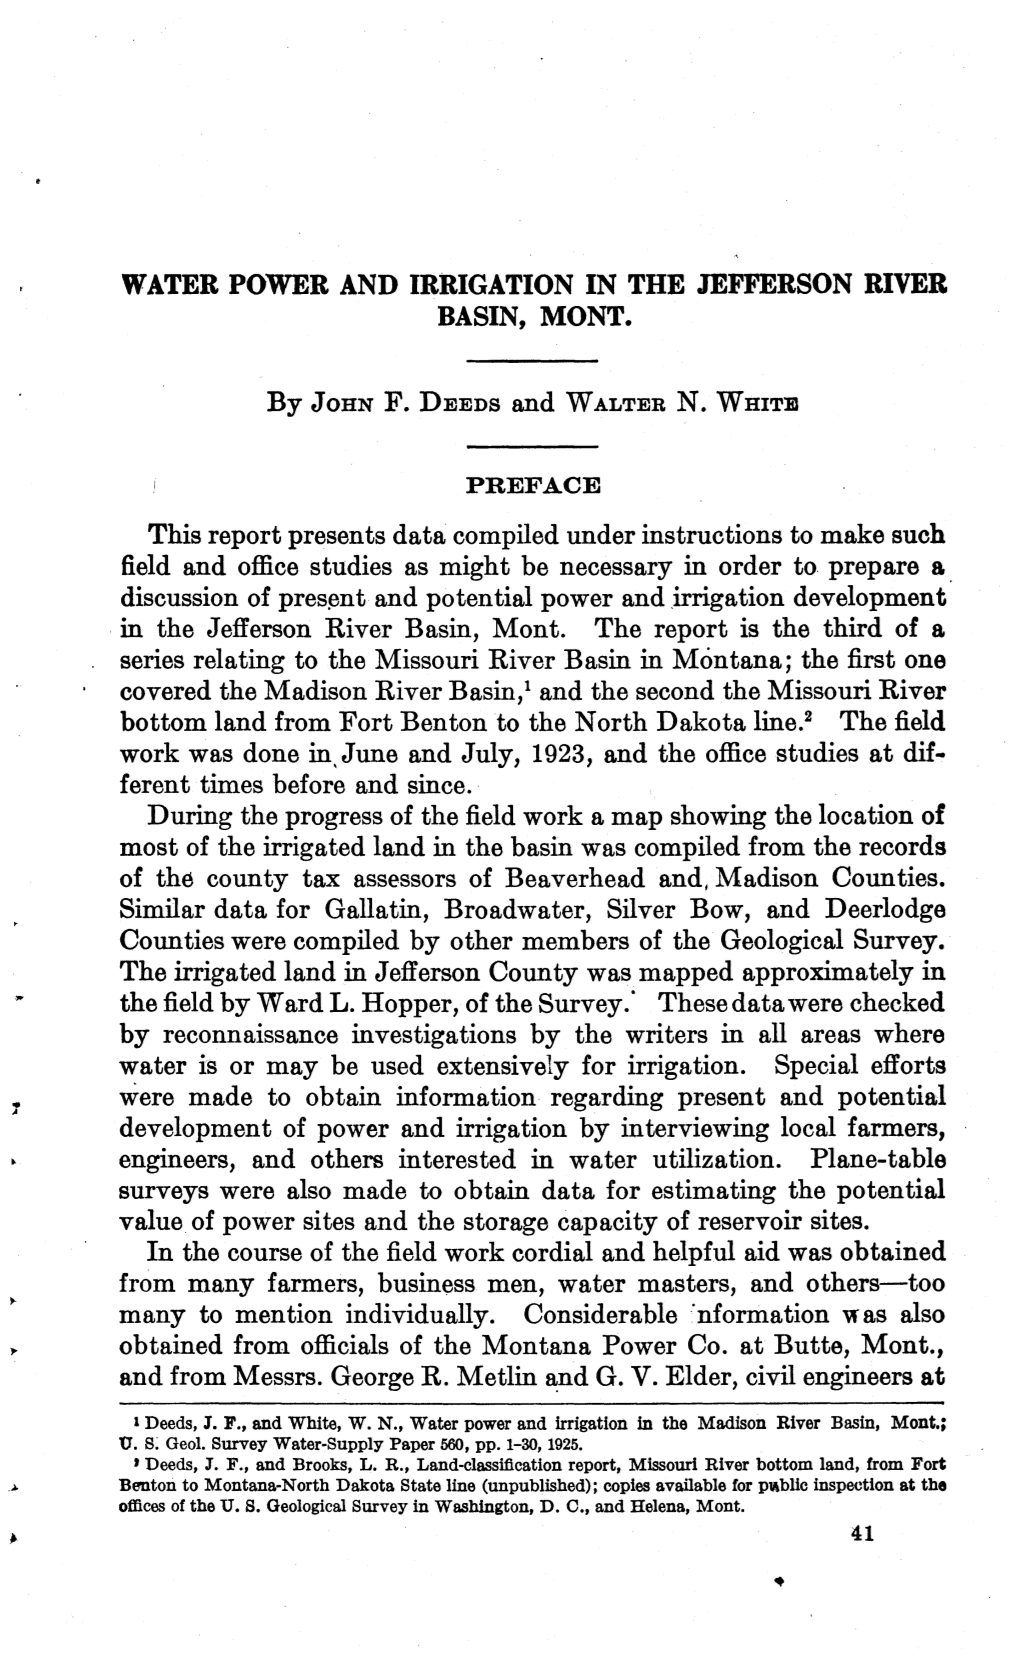 Water Power and Irrigation in the Jefferson River Basin, Mont